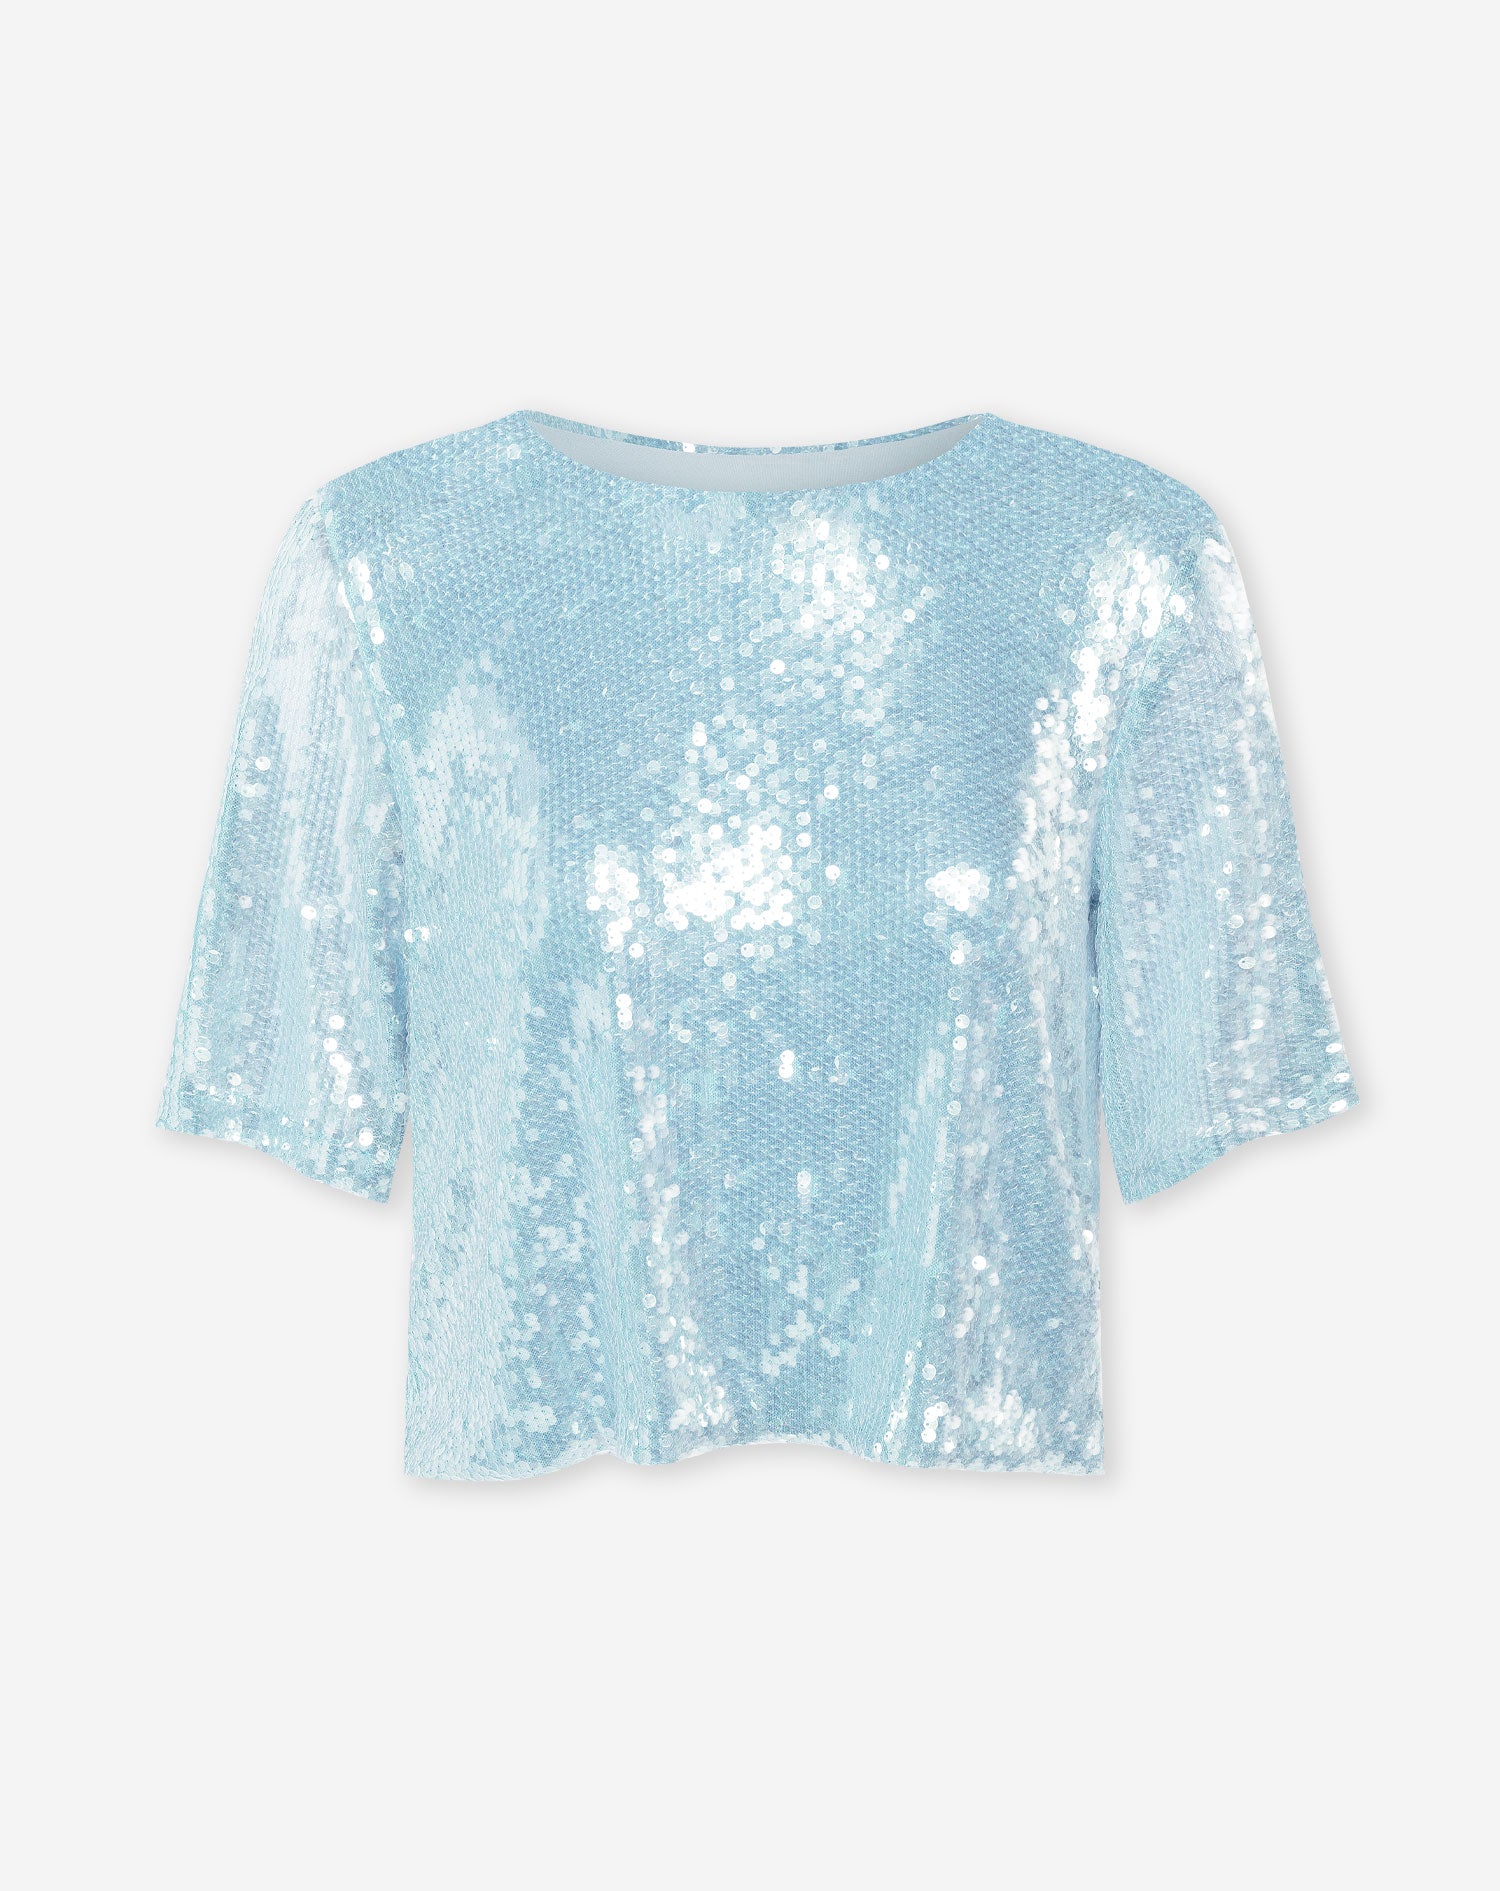 TRANSPARANT SEQUINS TEE TOP BLUE